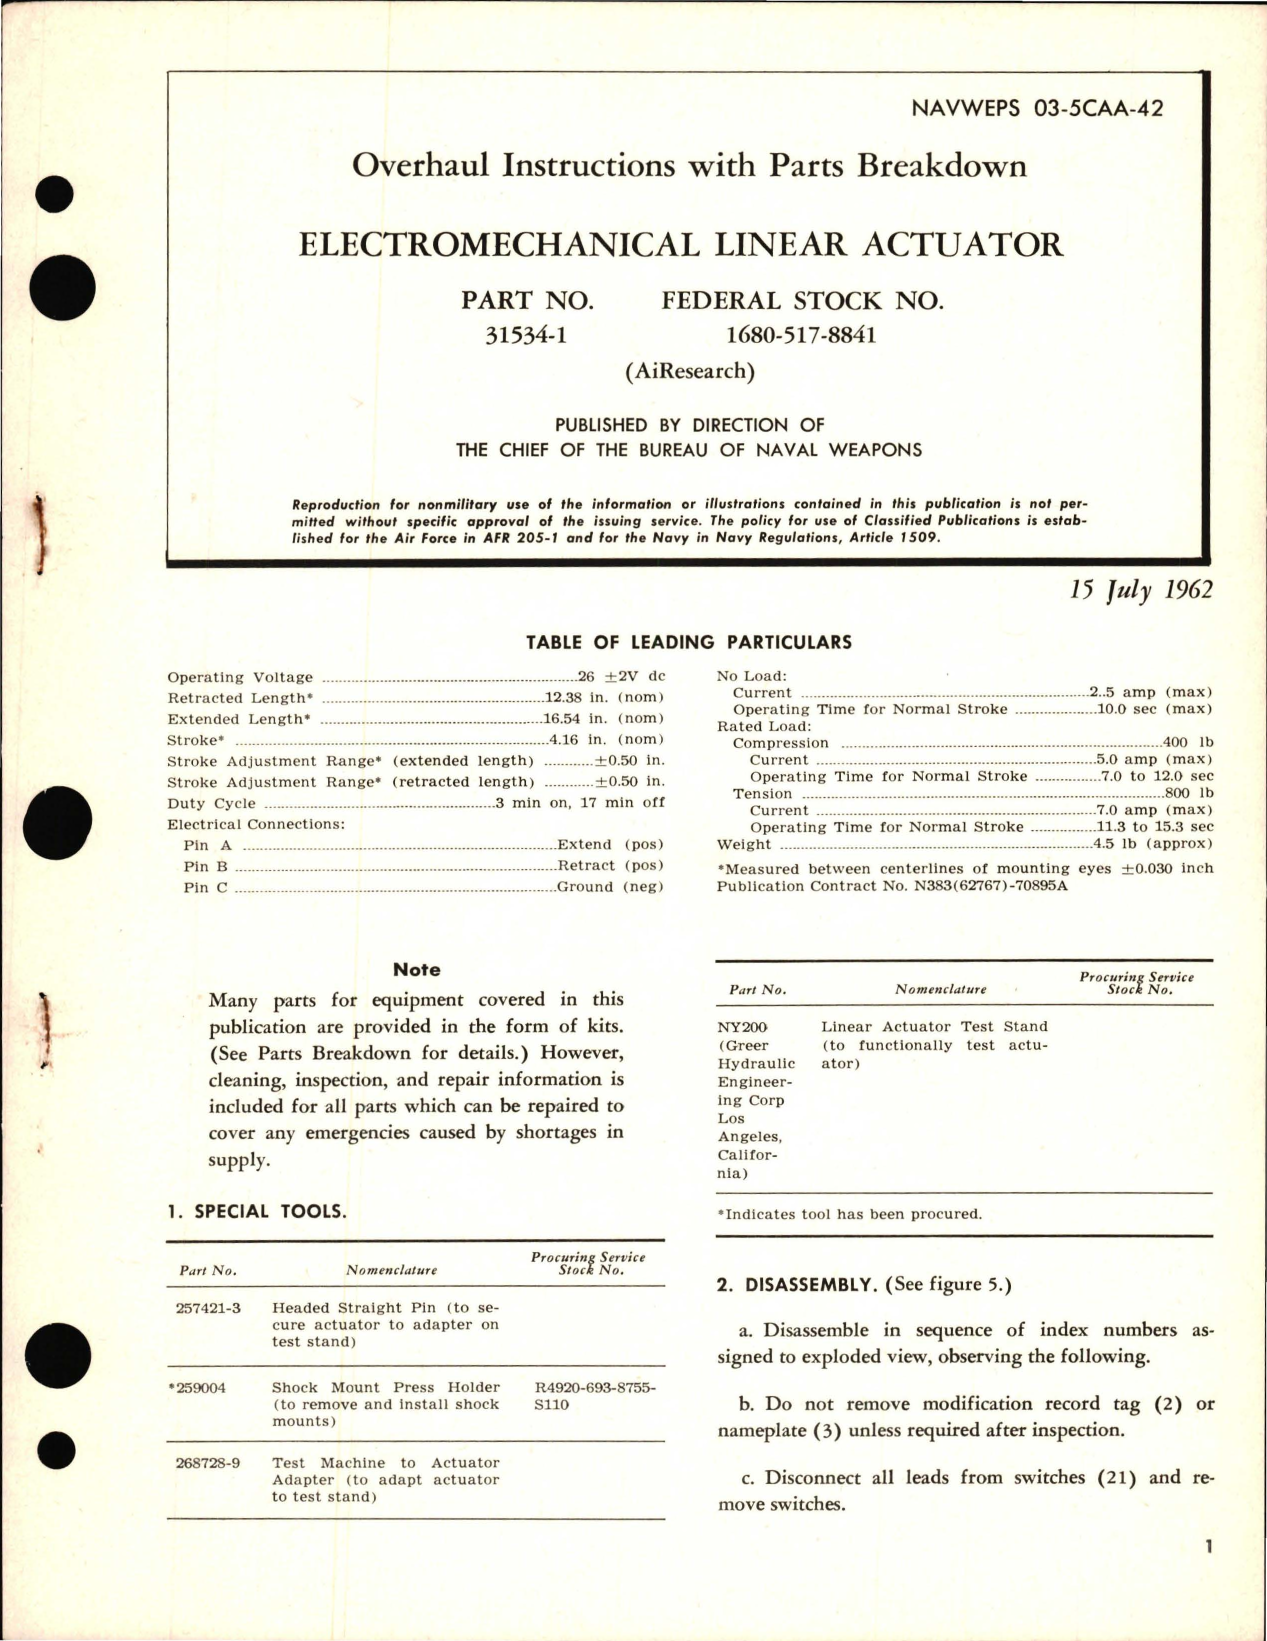 Sample page 1 from AirCorps Library document: Overhaul Instructions with Parts Breakdown for Electromechanical Linear Actuator Part 31534-1